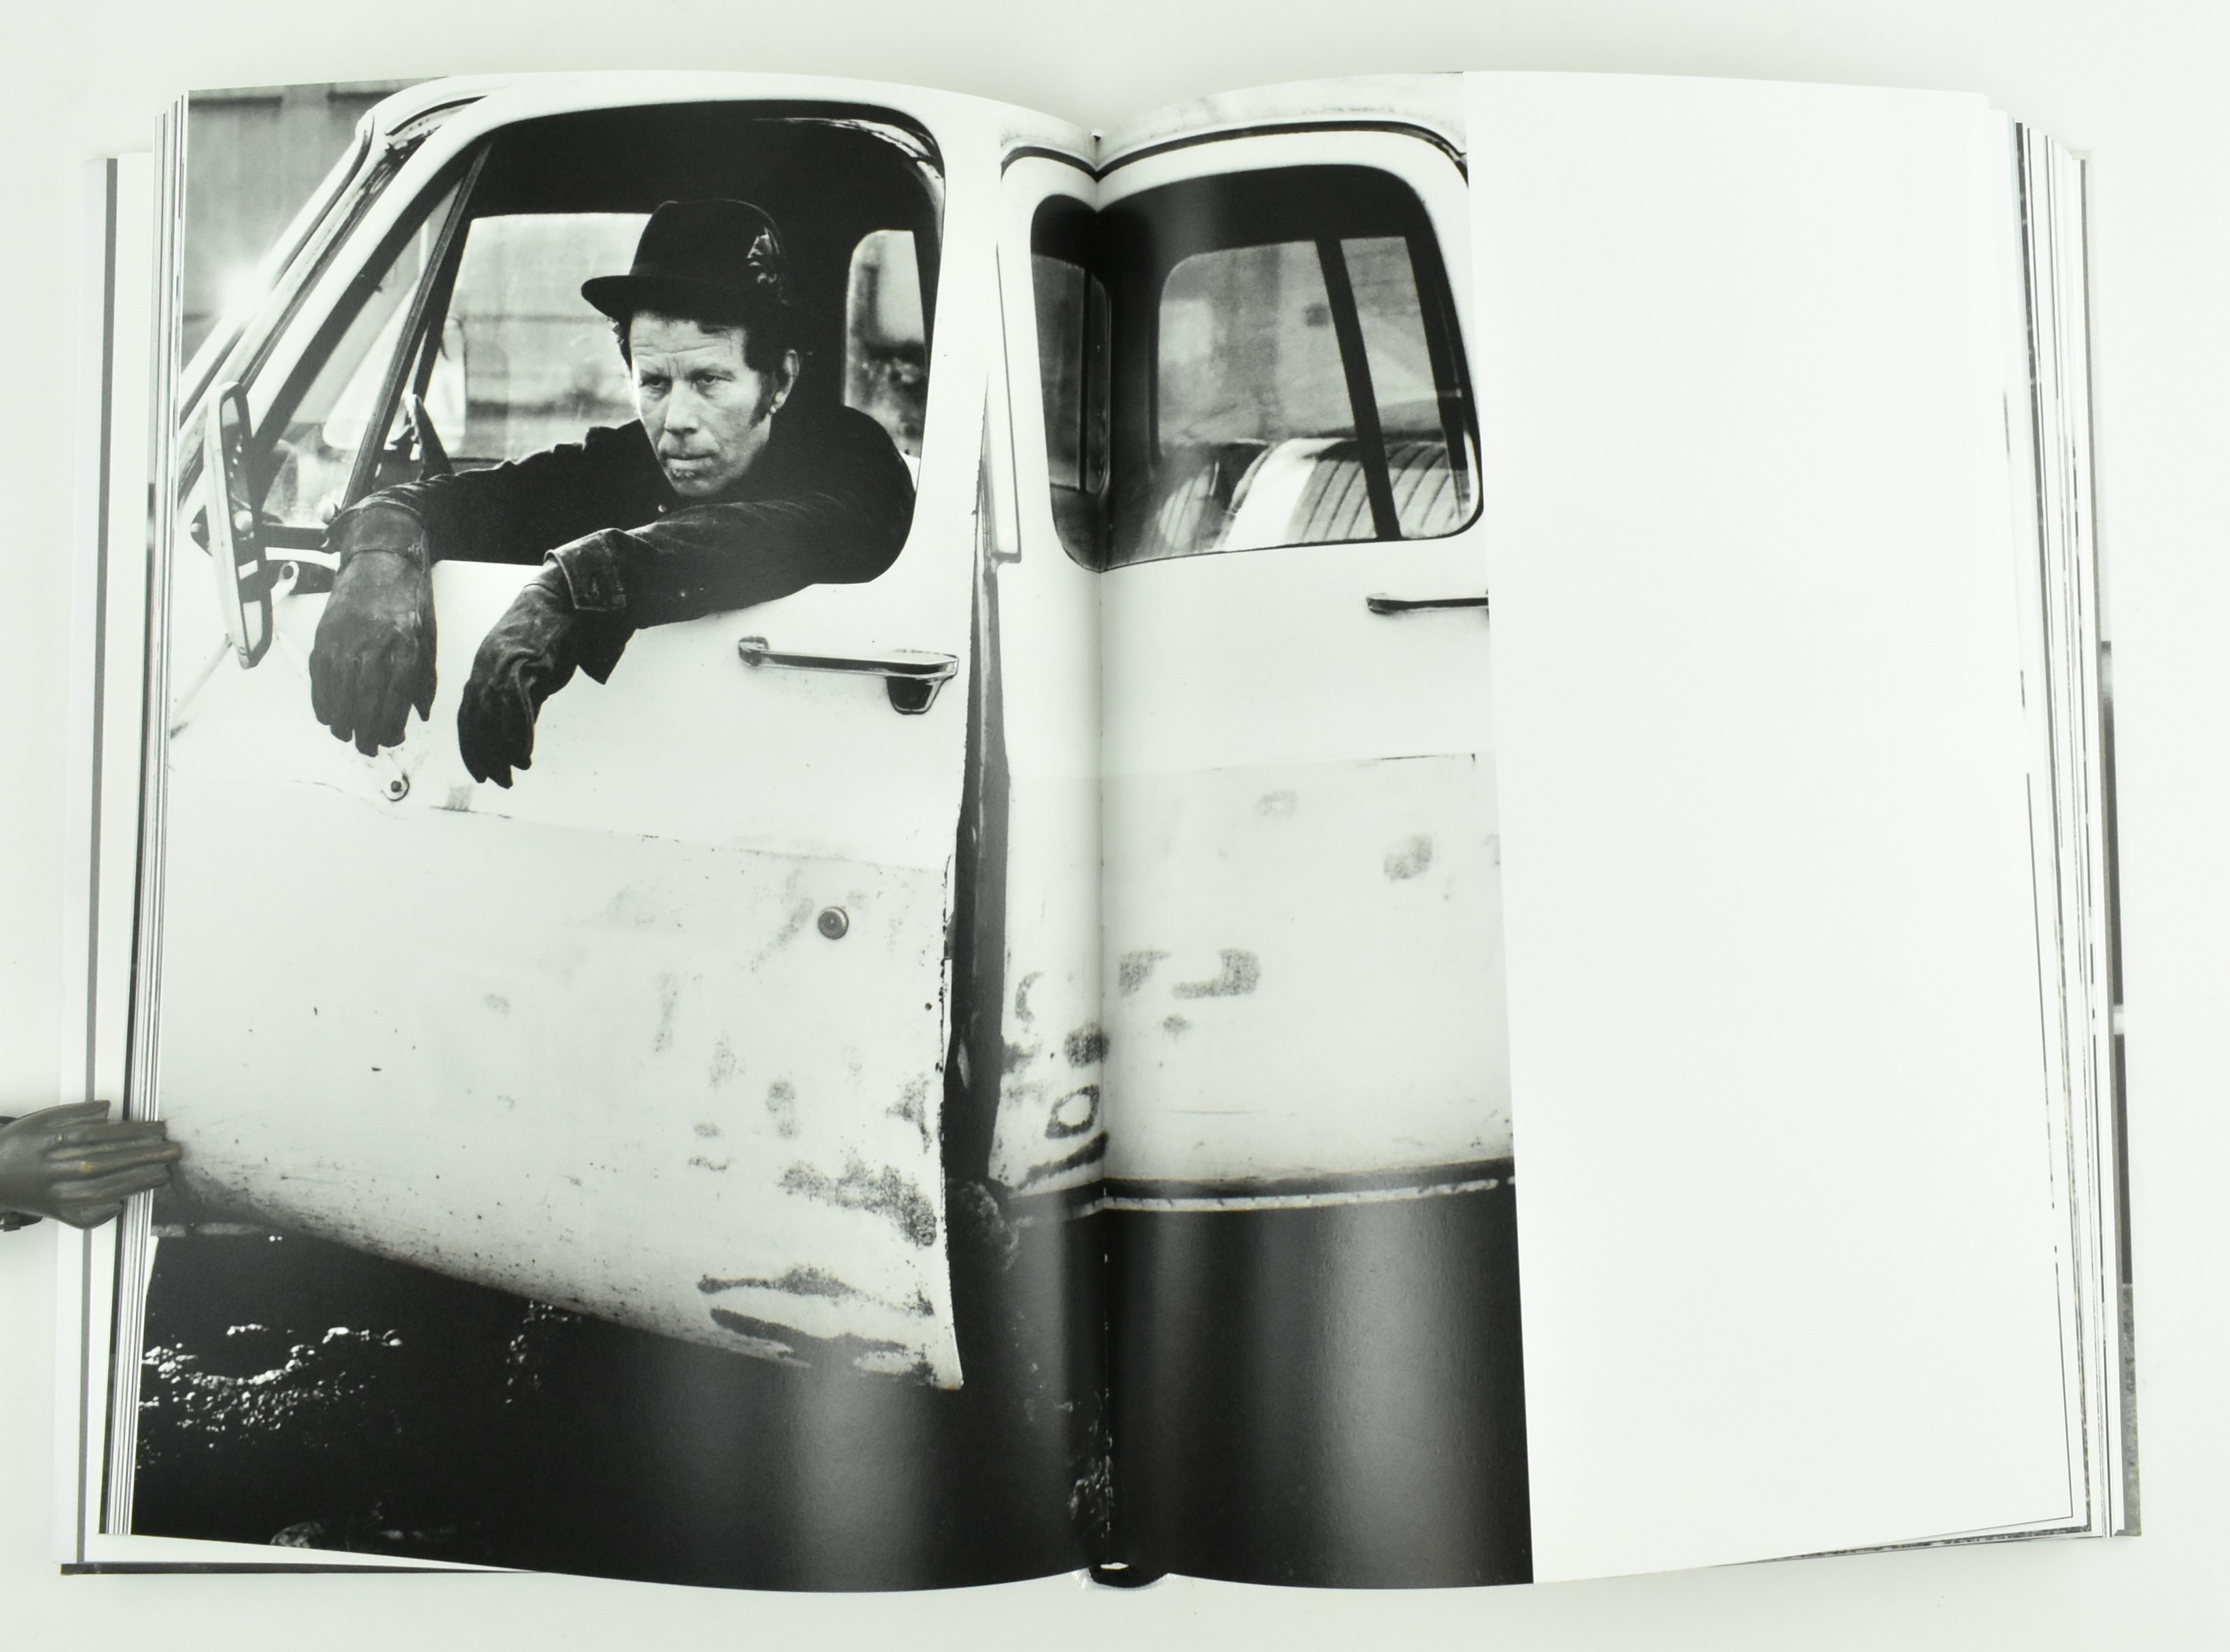 WAITS BY CORBIJN. LIMITED EDITION ON TOM WAITS IN SLIPCASE - Image 5 of 7